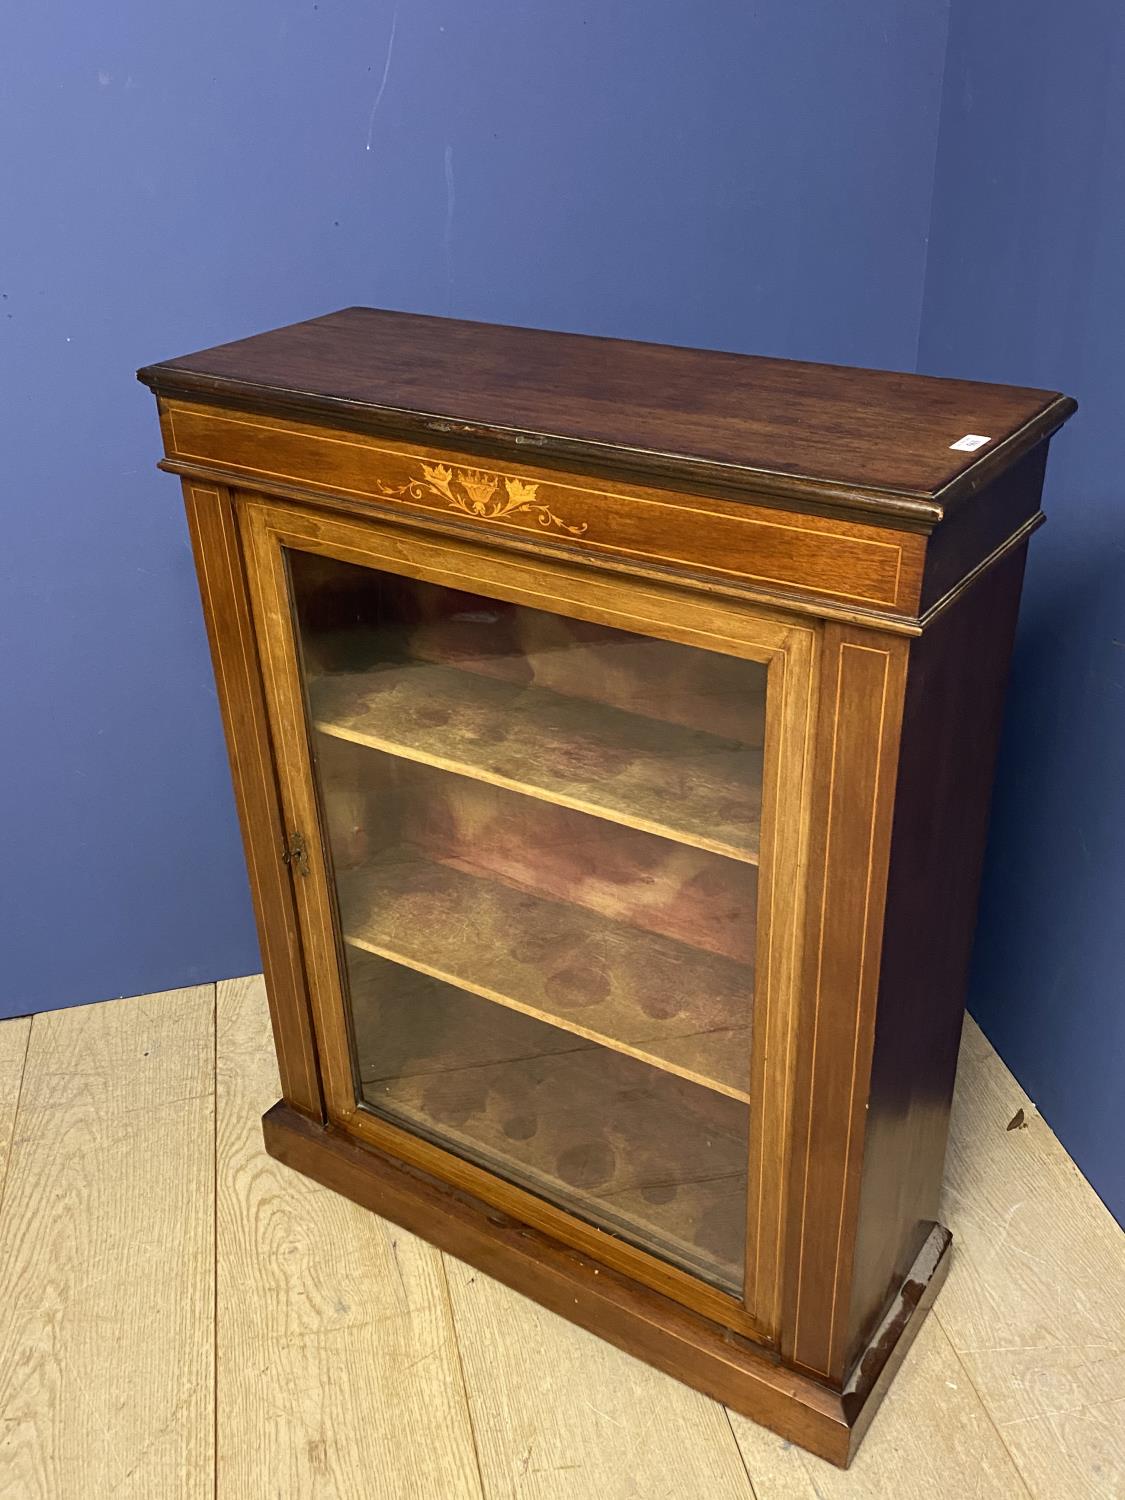 19th century mahogany inlaid enclosed bookcase with adjustable shelves - Image 2 of 10